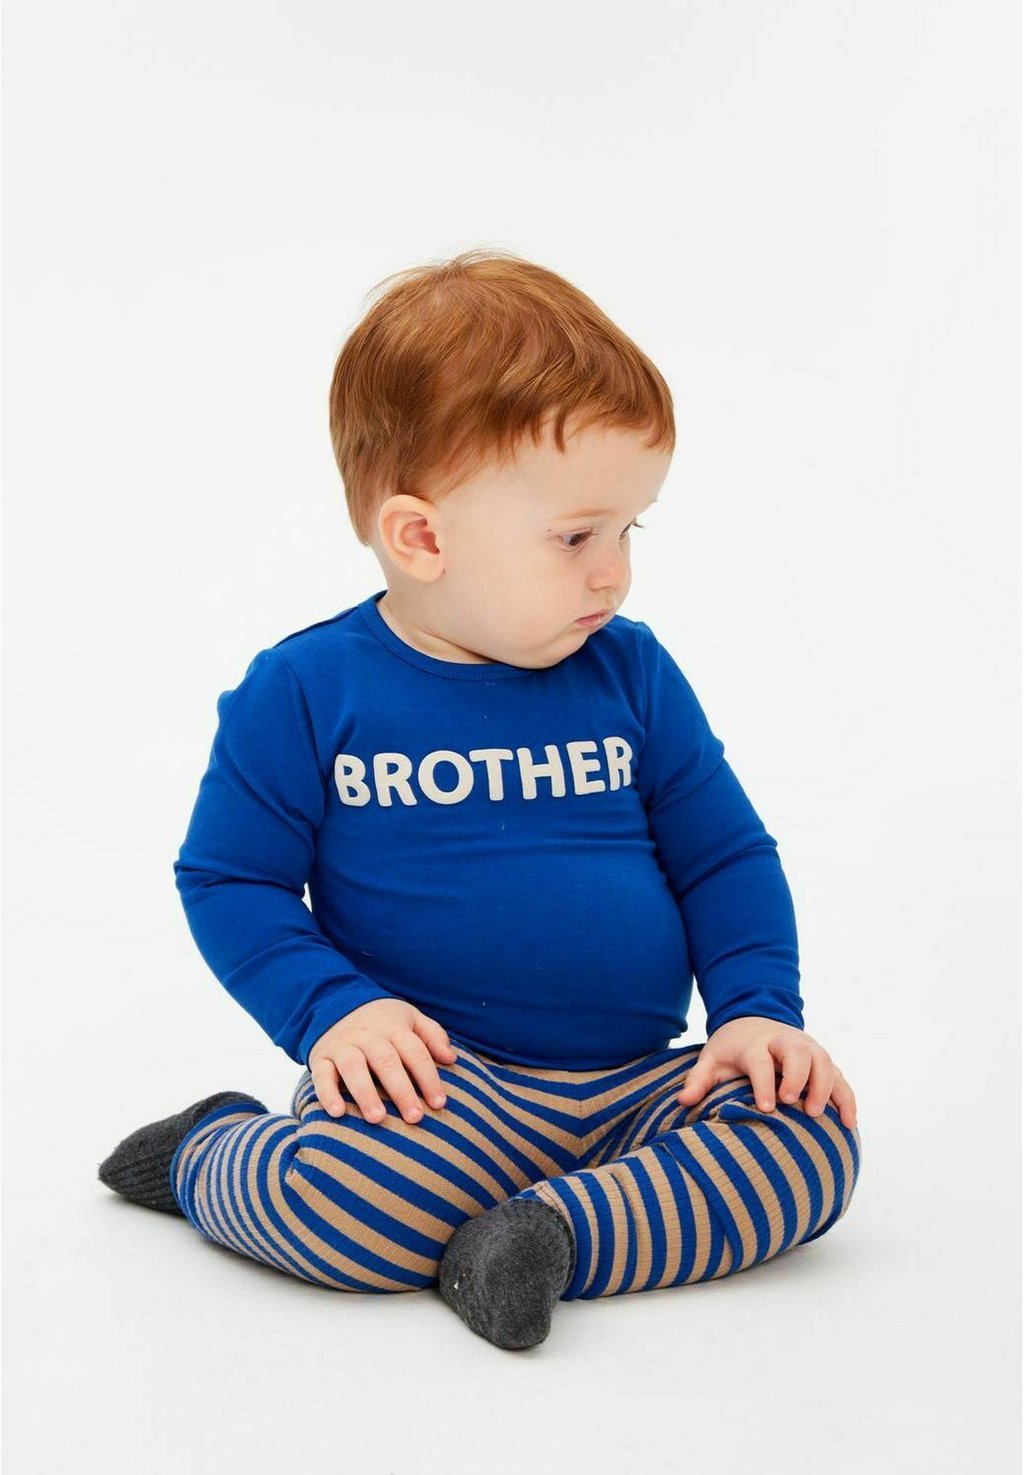 Боди BROTHER L S The New Siblings, цвет monaco blue